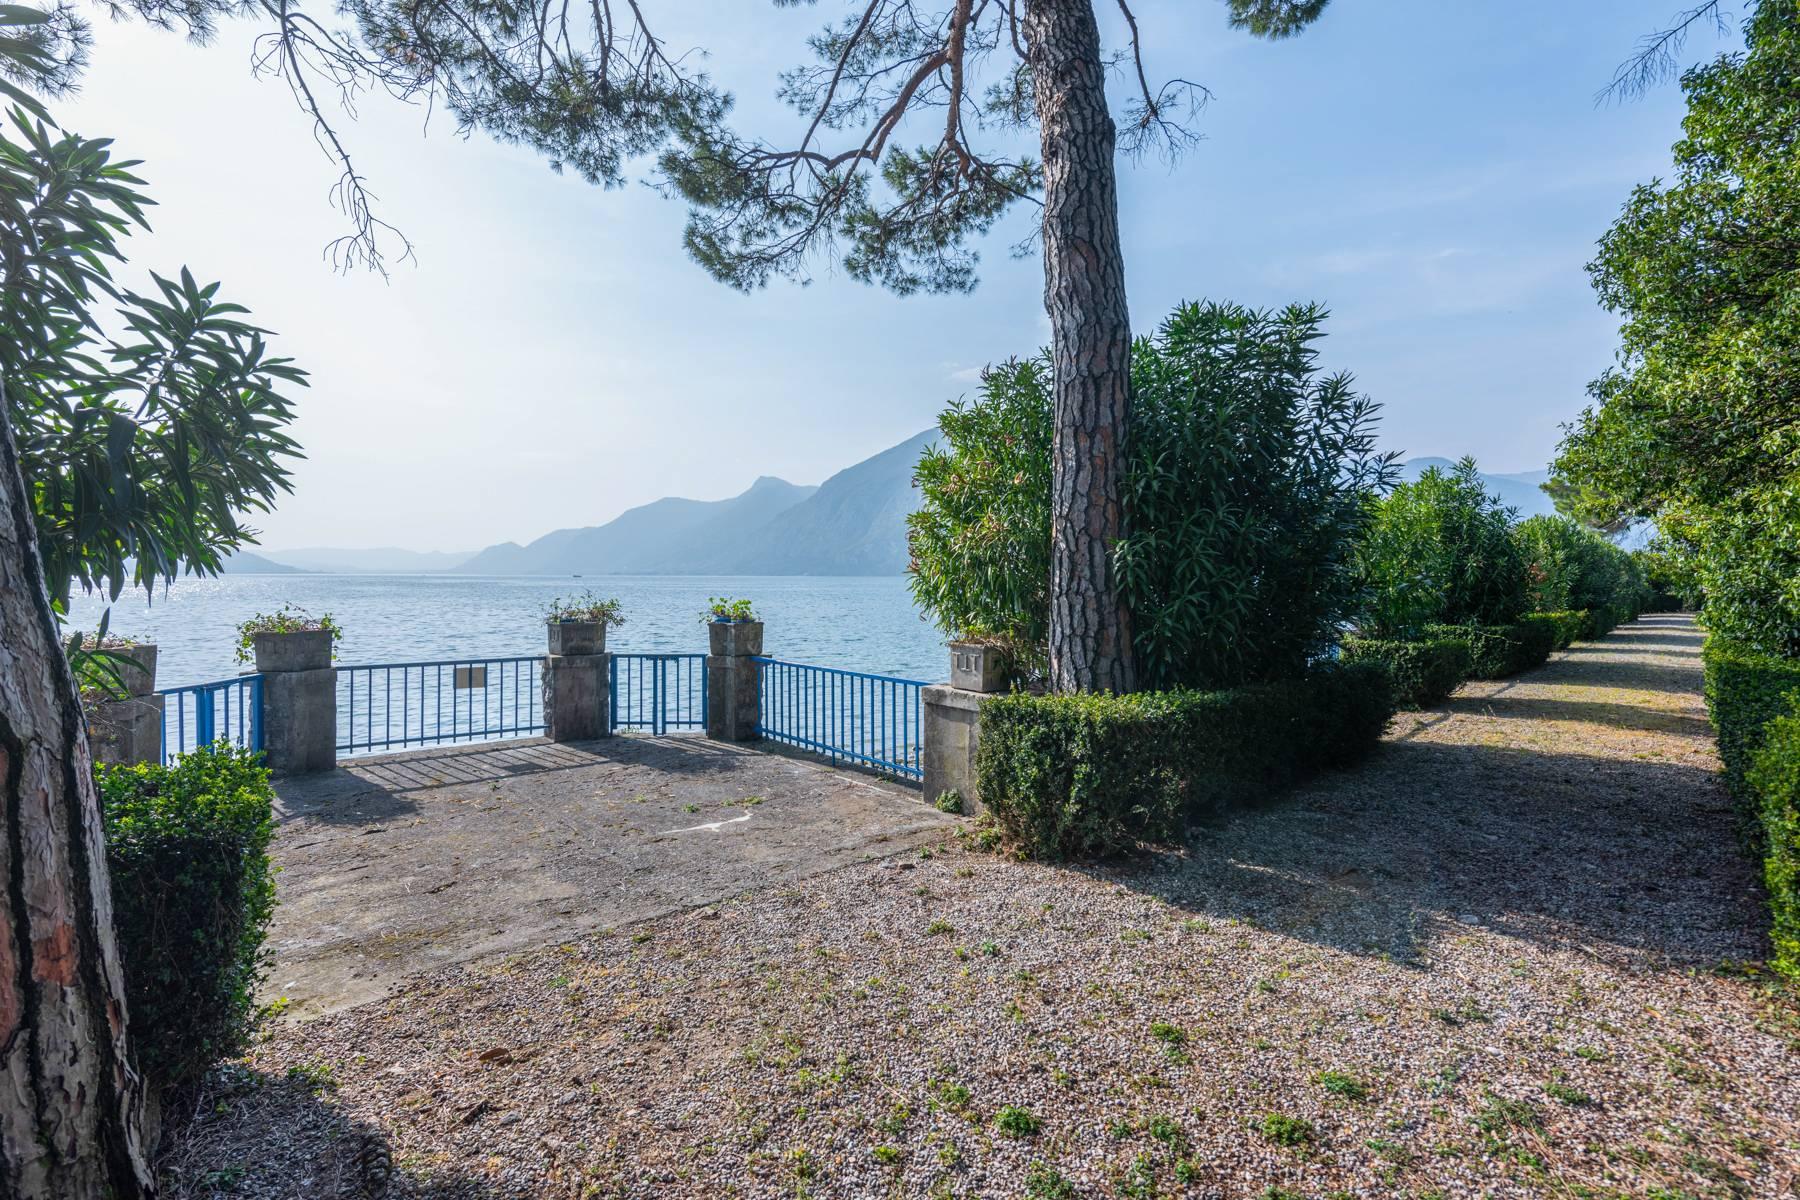 Stunning villa pieds dans l'eau with magnificent park and dock on Lake Iseo - 32